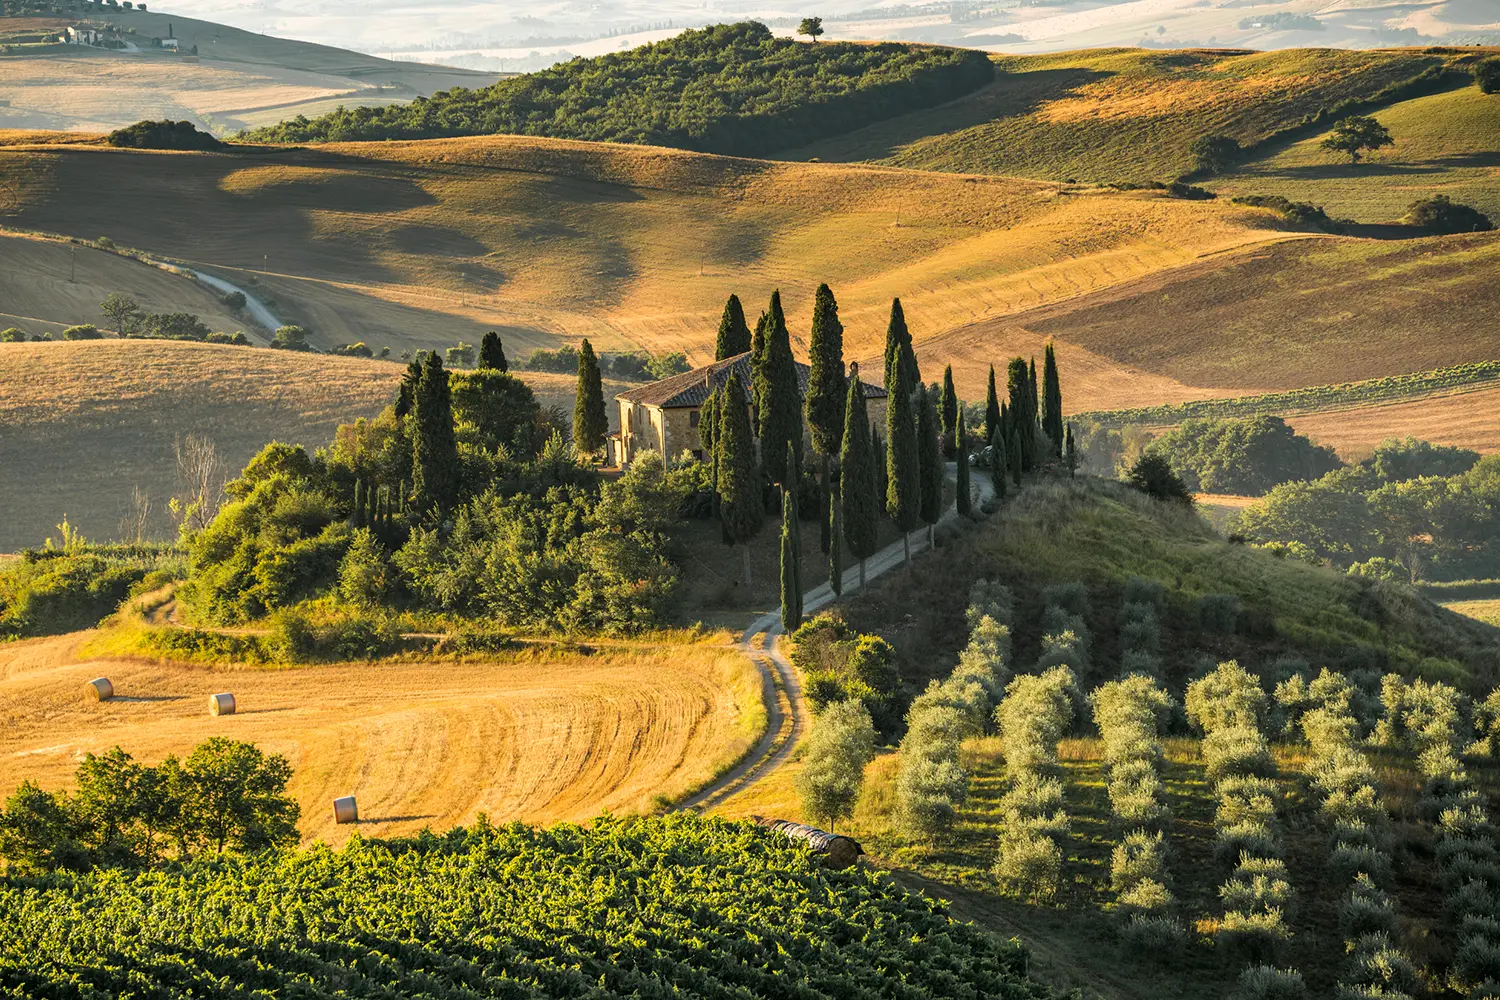 The rolling hills of Tuscany in Italy